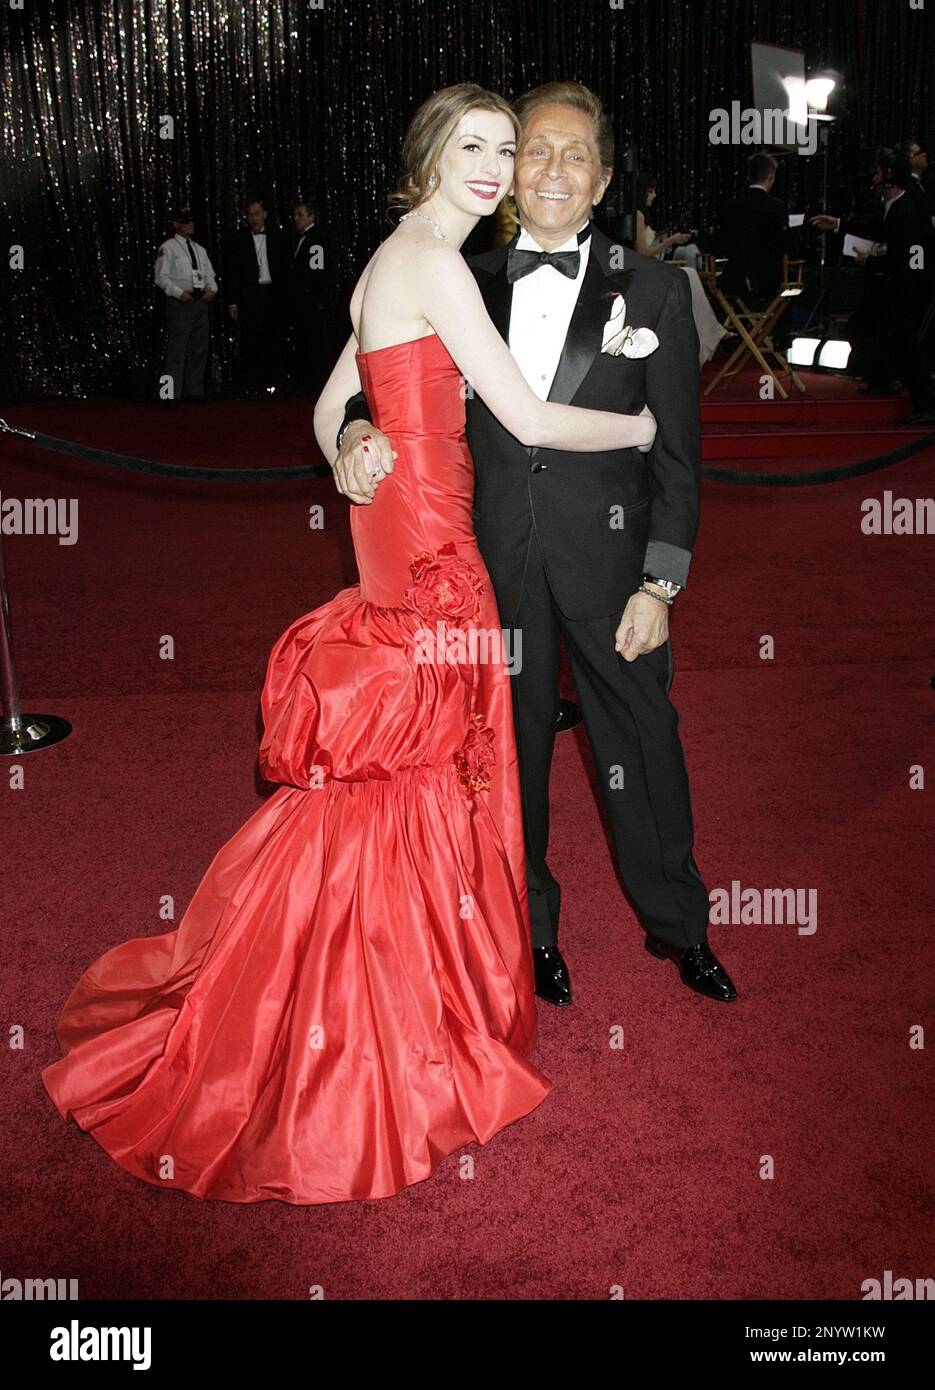 Actress Anne Hathaway and fashion designer Valentino arrive at the 83rd Annual Academy Awards held at the Kodak Theatre on February 27, 2011 in Hollywood, California.  Photo by Francis Specker Stock Photo